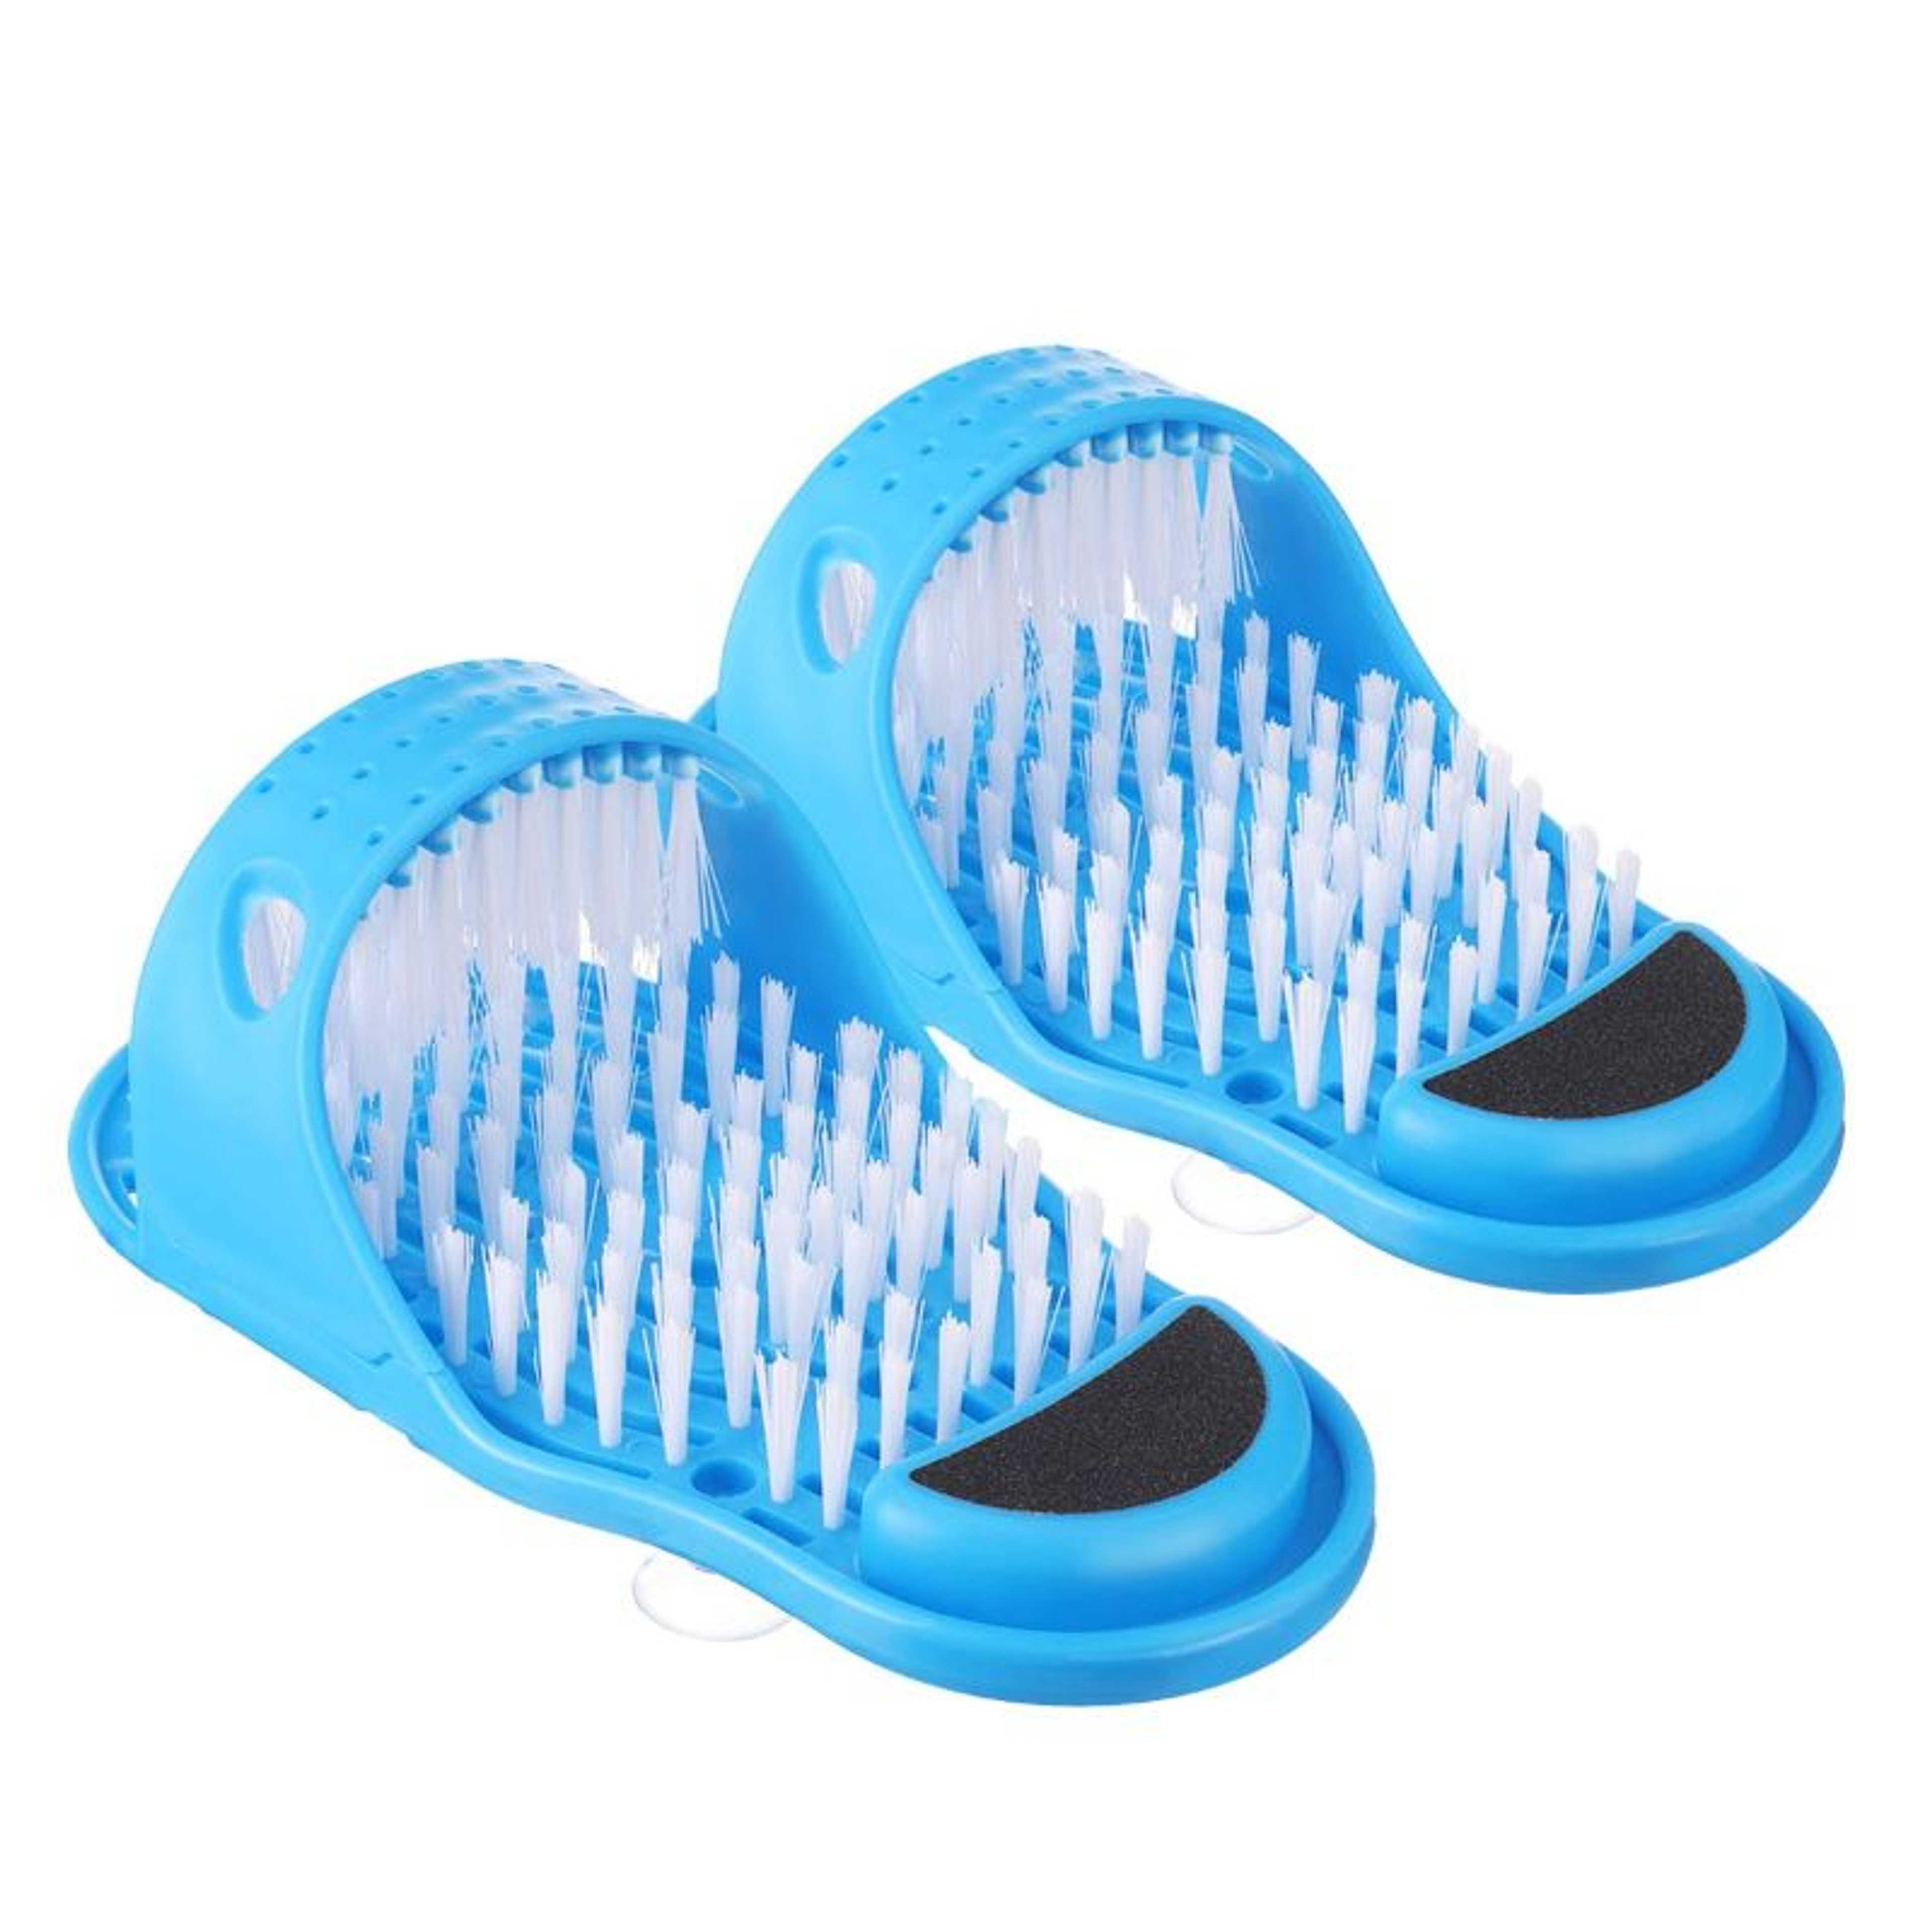 Magic Foot Scrubber, Feet Cleaner, Feet Shower Spa Massage, Easy Cleaning Brush Exfoliating Foot Massager Slippers